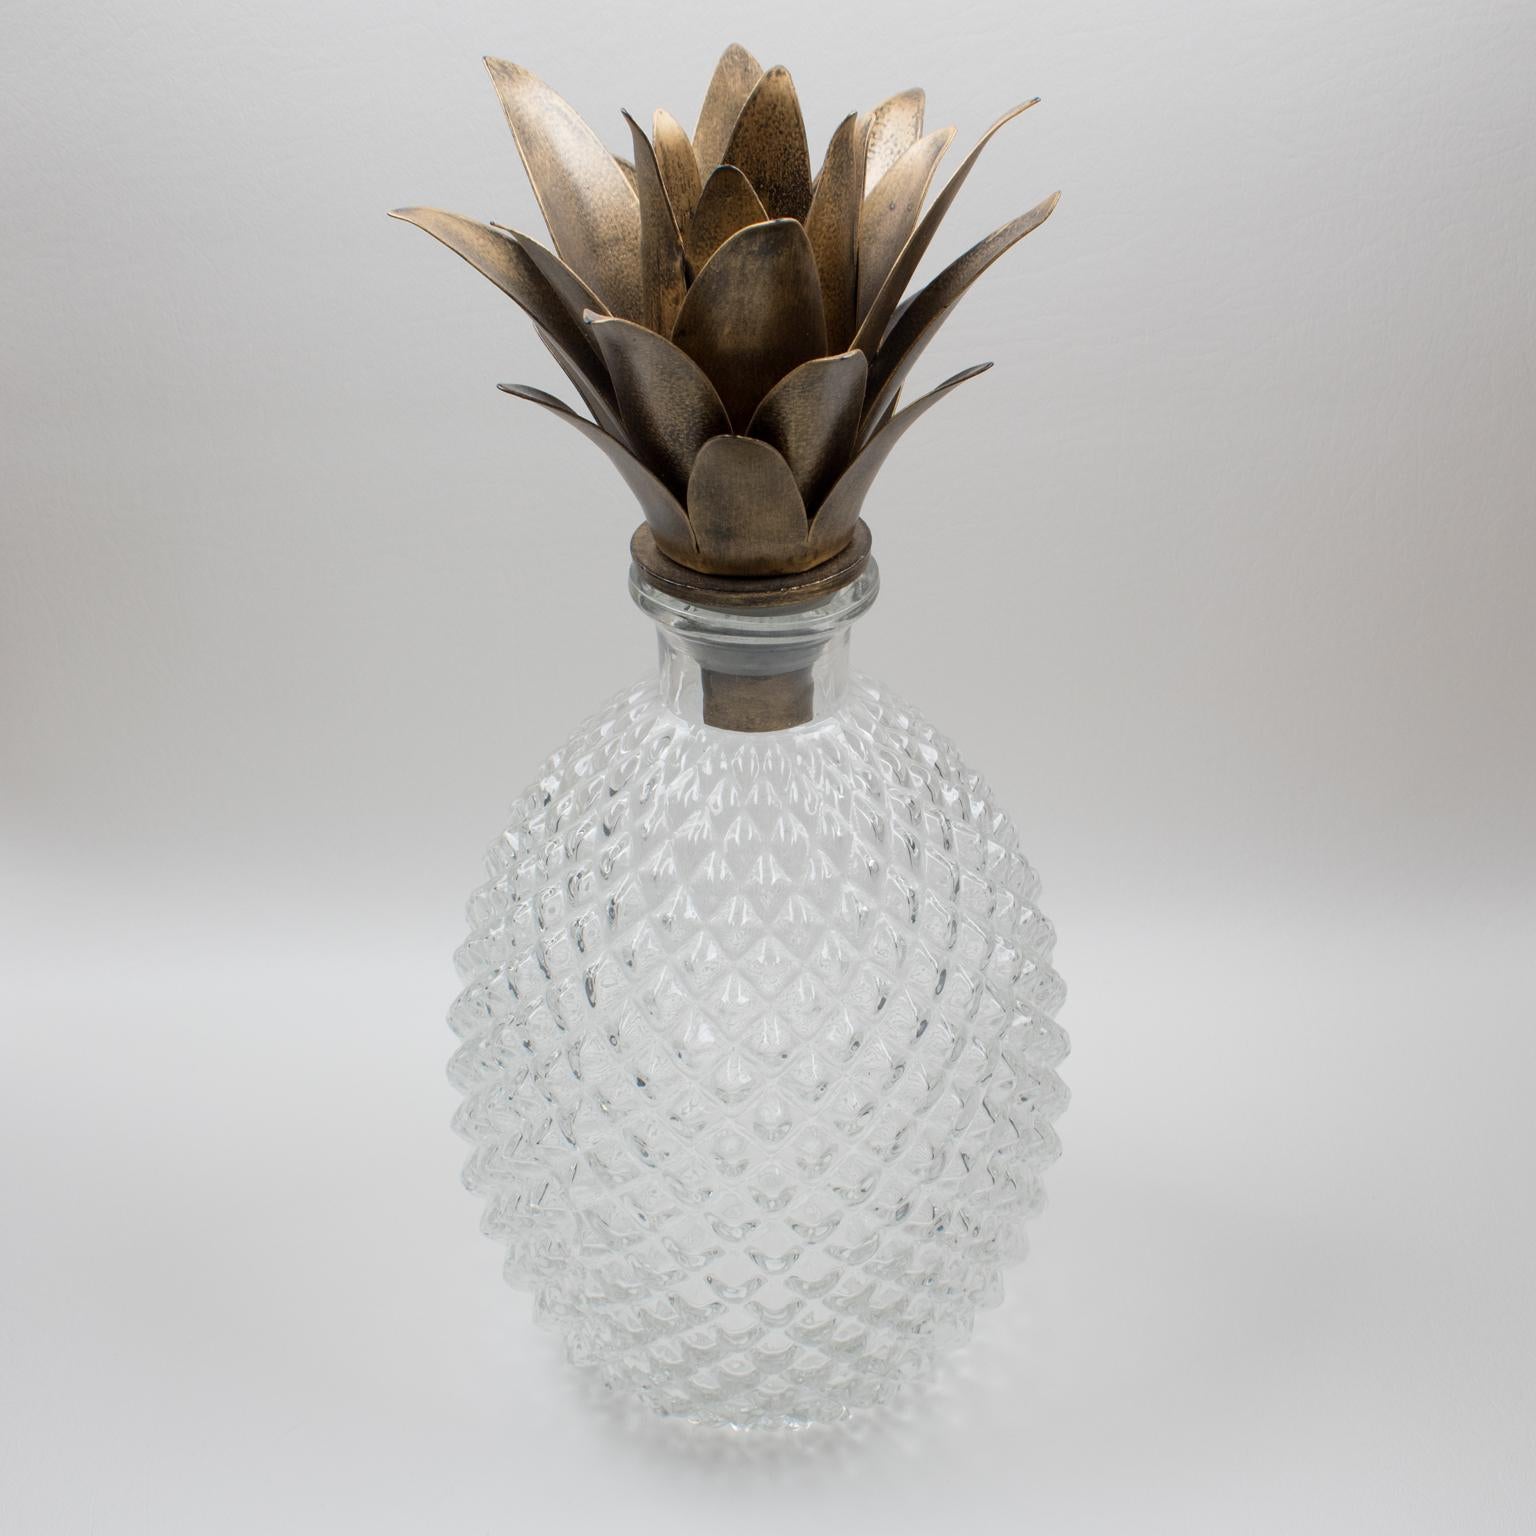 Lovely molded glass pineapple bottle or decanter with gilt metal fronds. Sculptural molded glass with hobnail pattern all around. The pineapple is internationally recognized to be the symbol of hospitality. The gilt metal crown of leaves on lid is